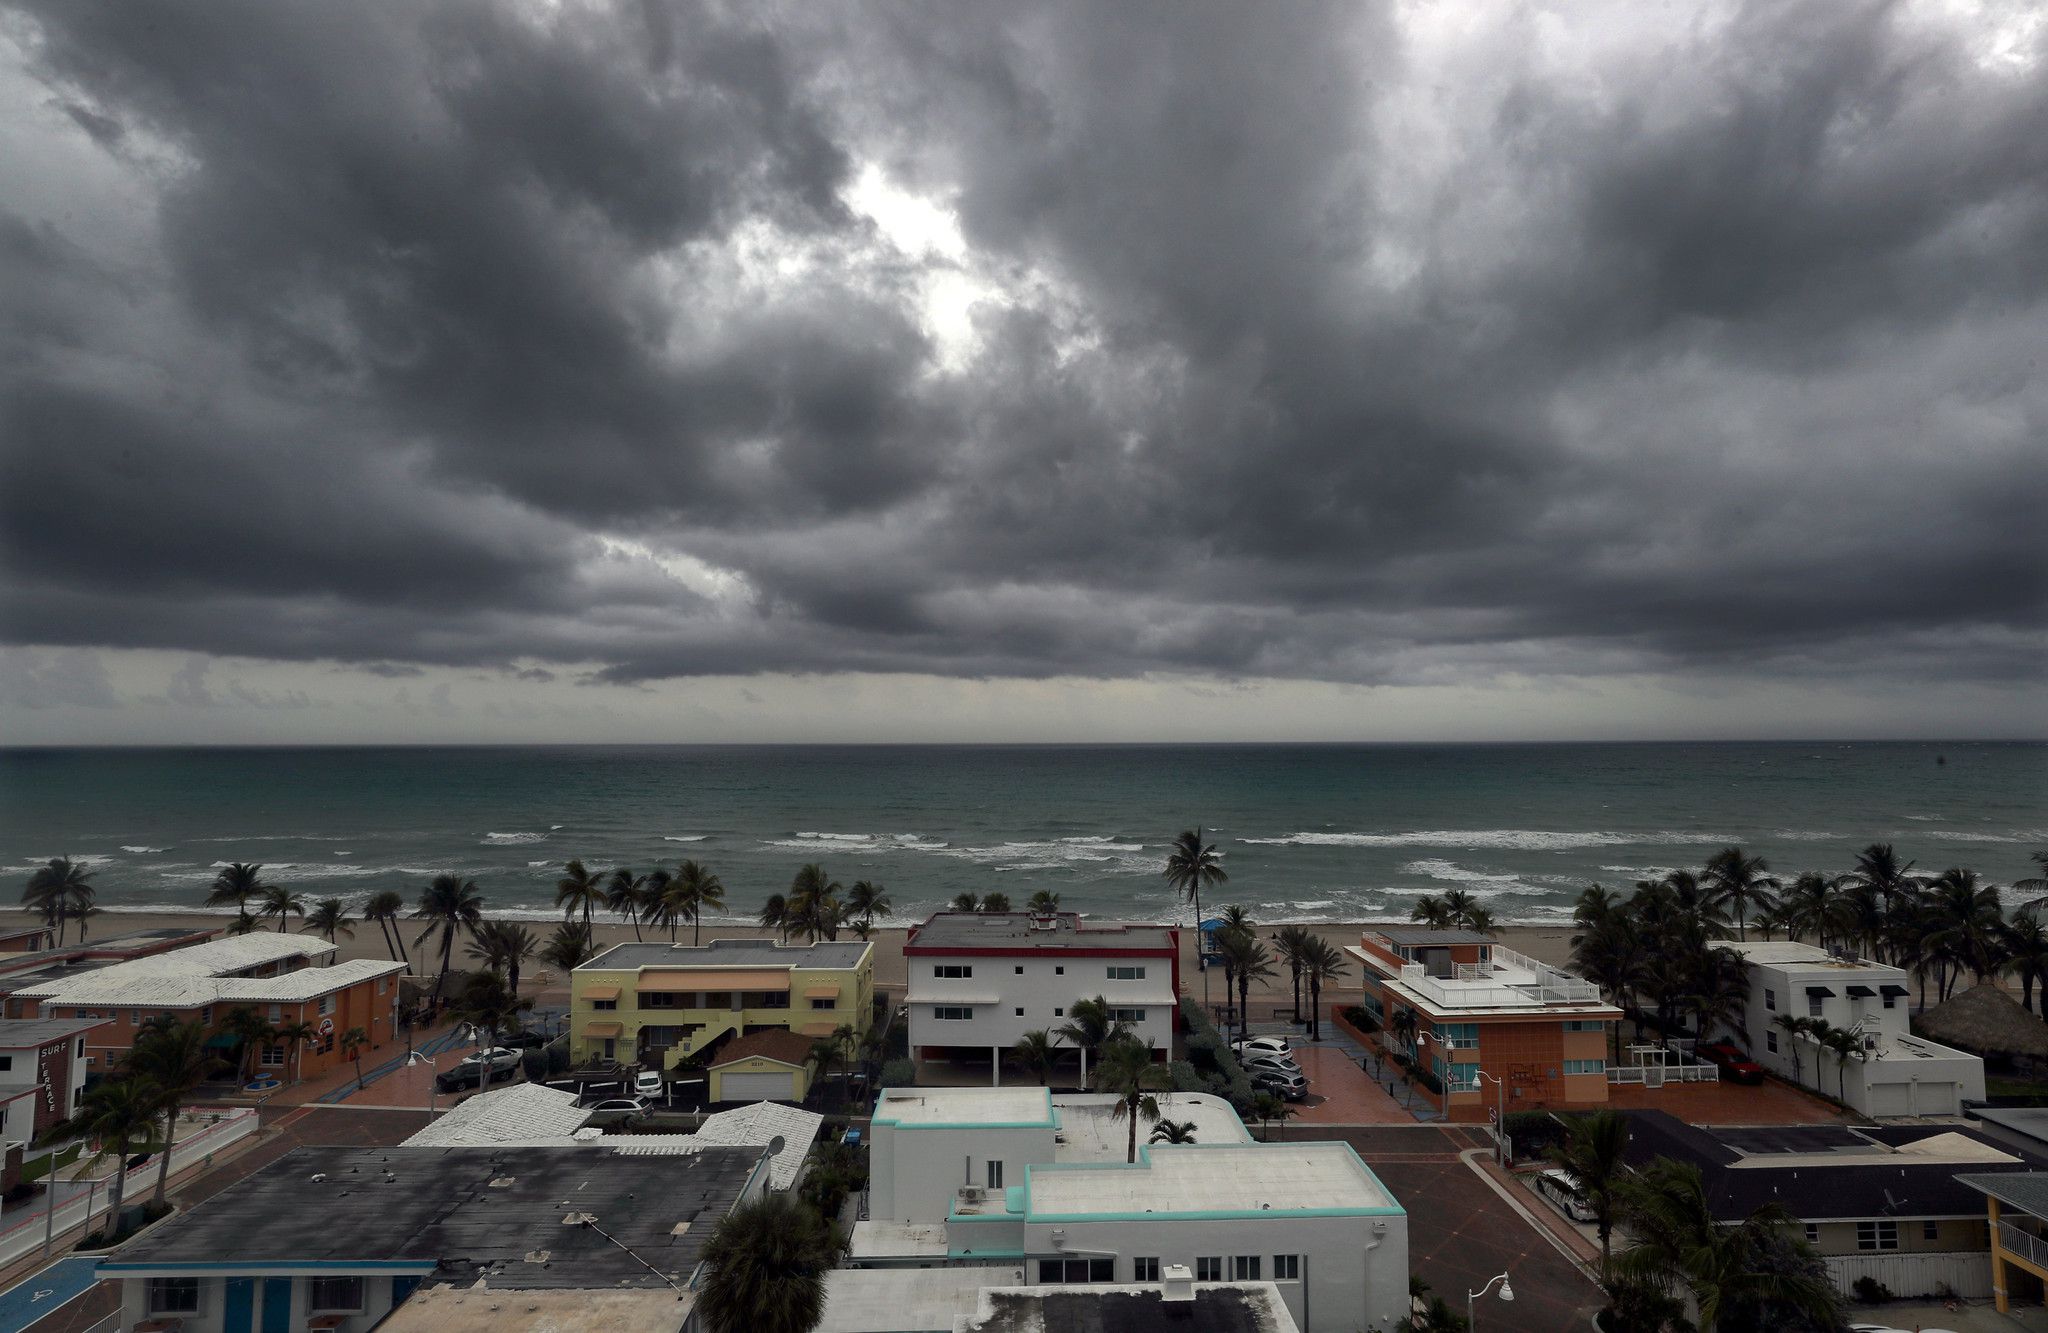 Information In Spanish Amid Hurricane Season Is Complicated, According To Activists